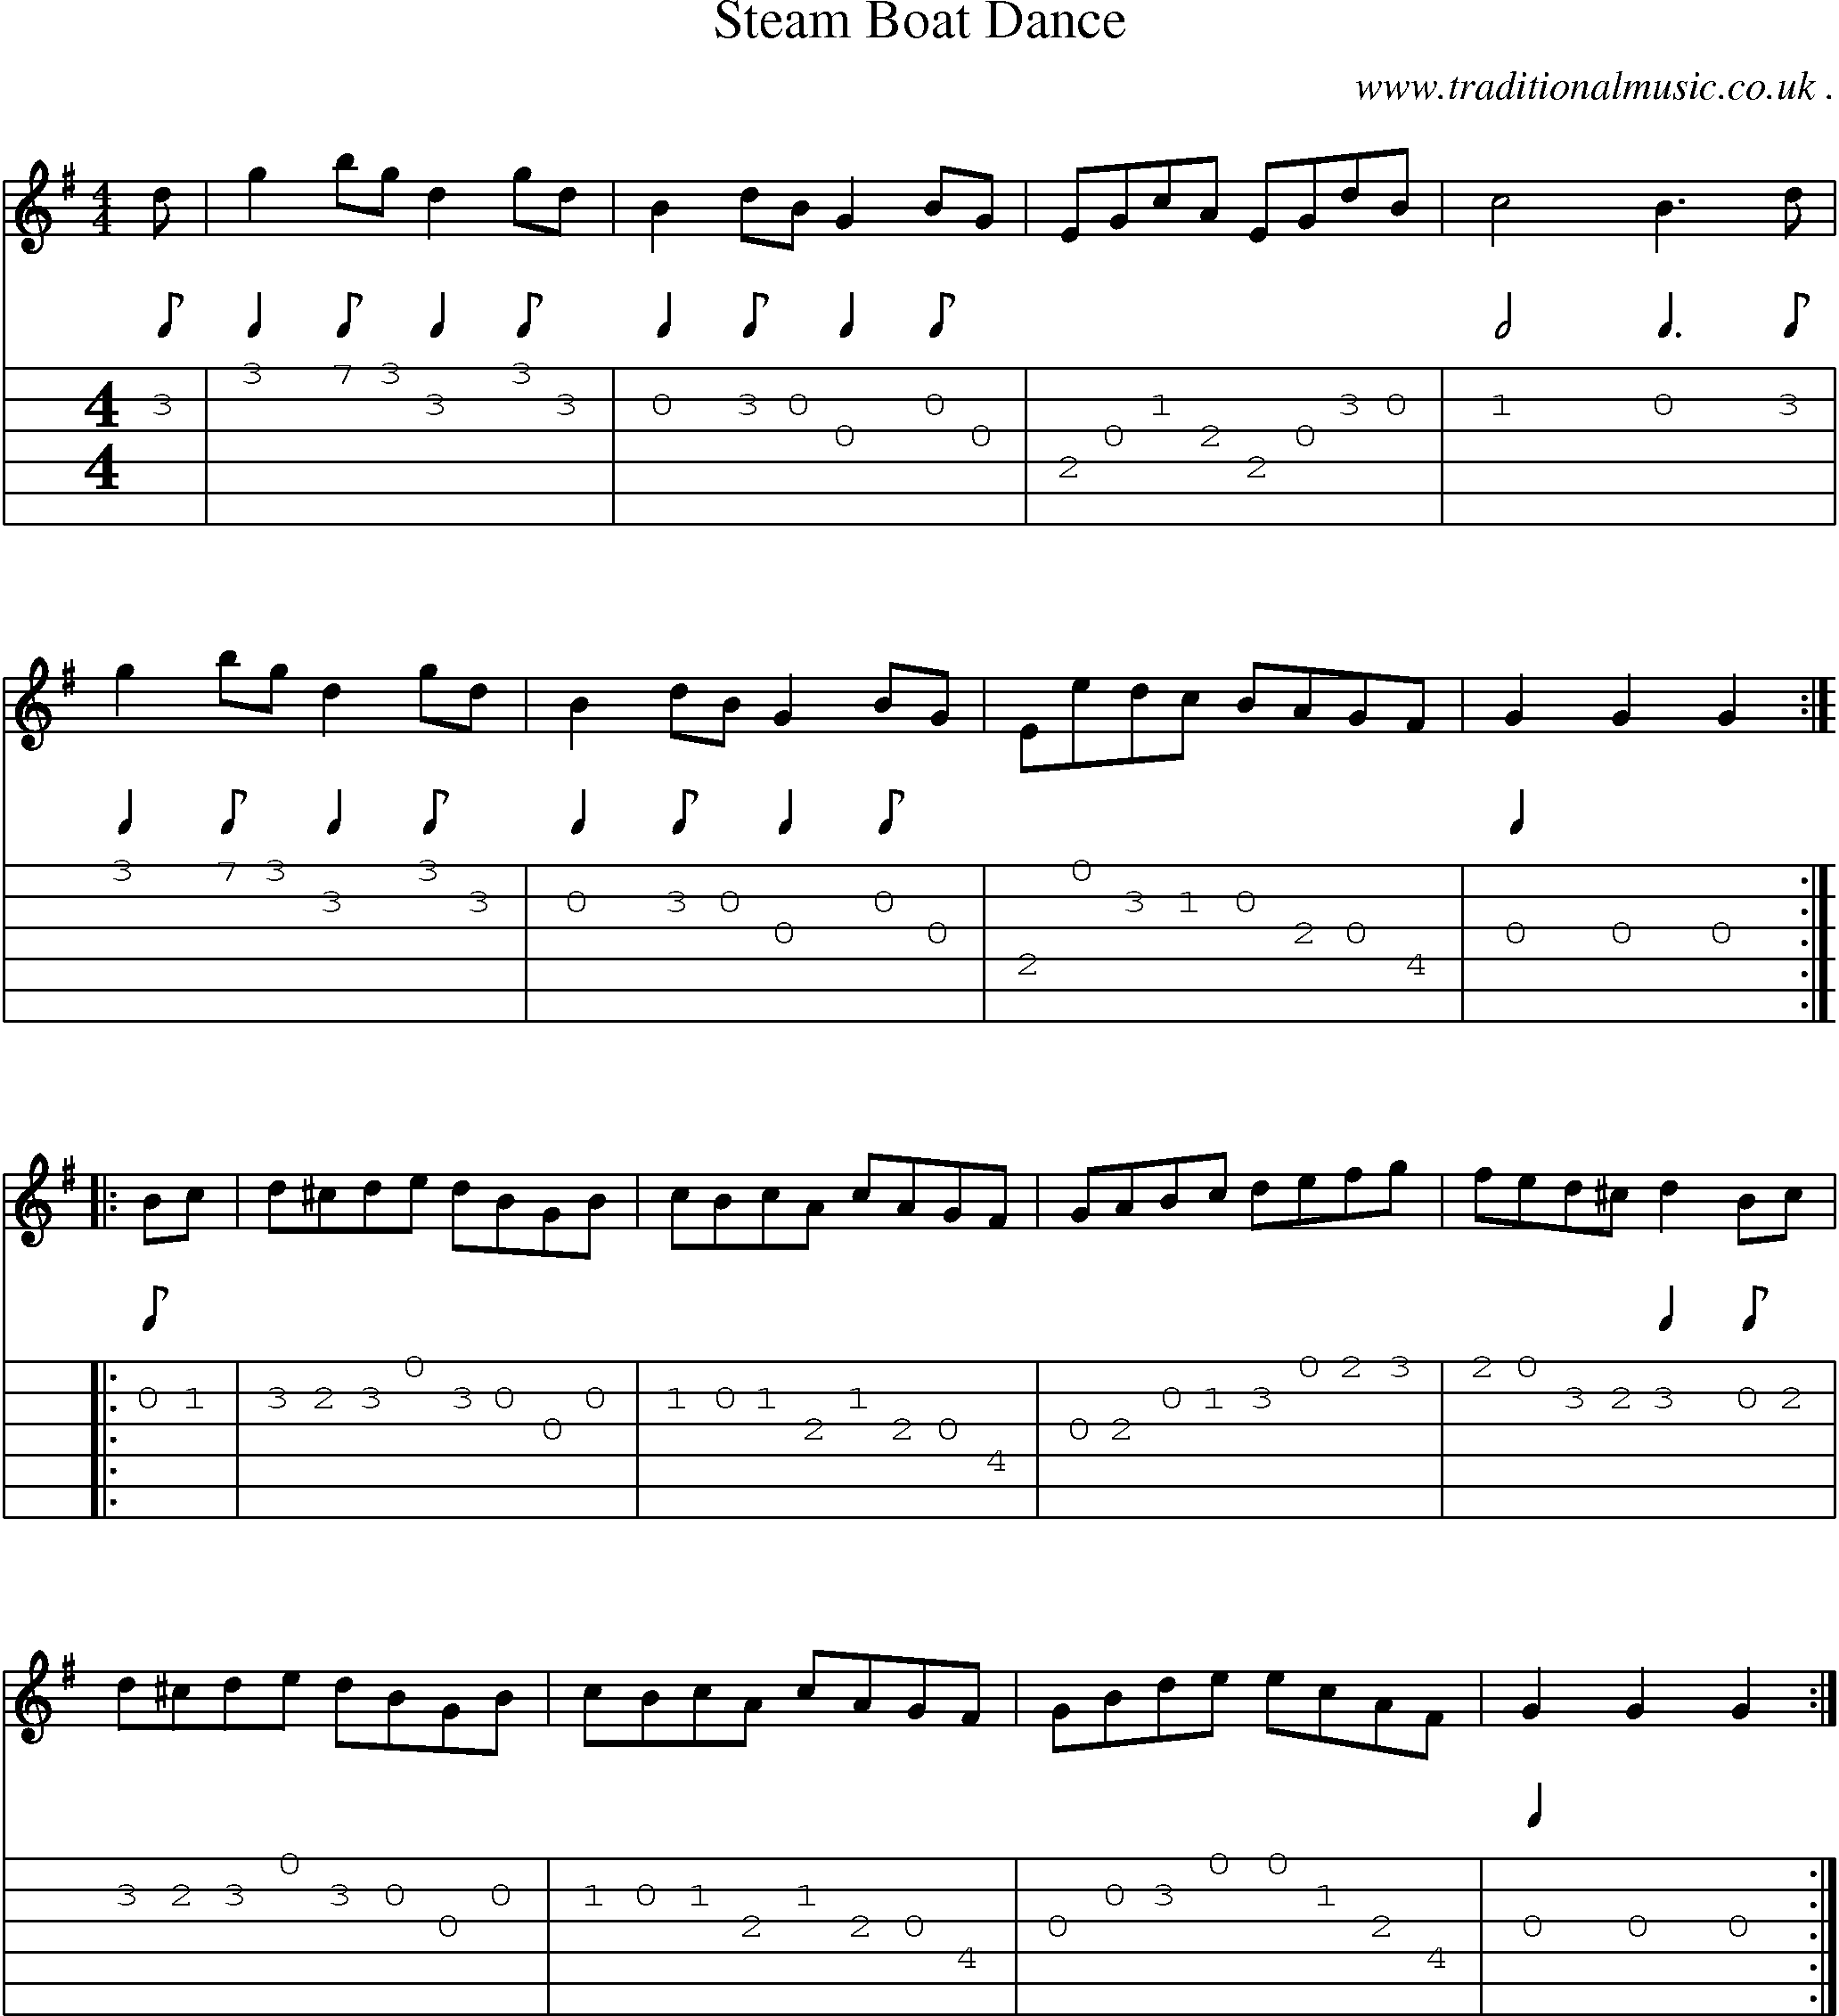 Sheet-Music and Guitar Tabs for Steam Boat Dance